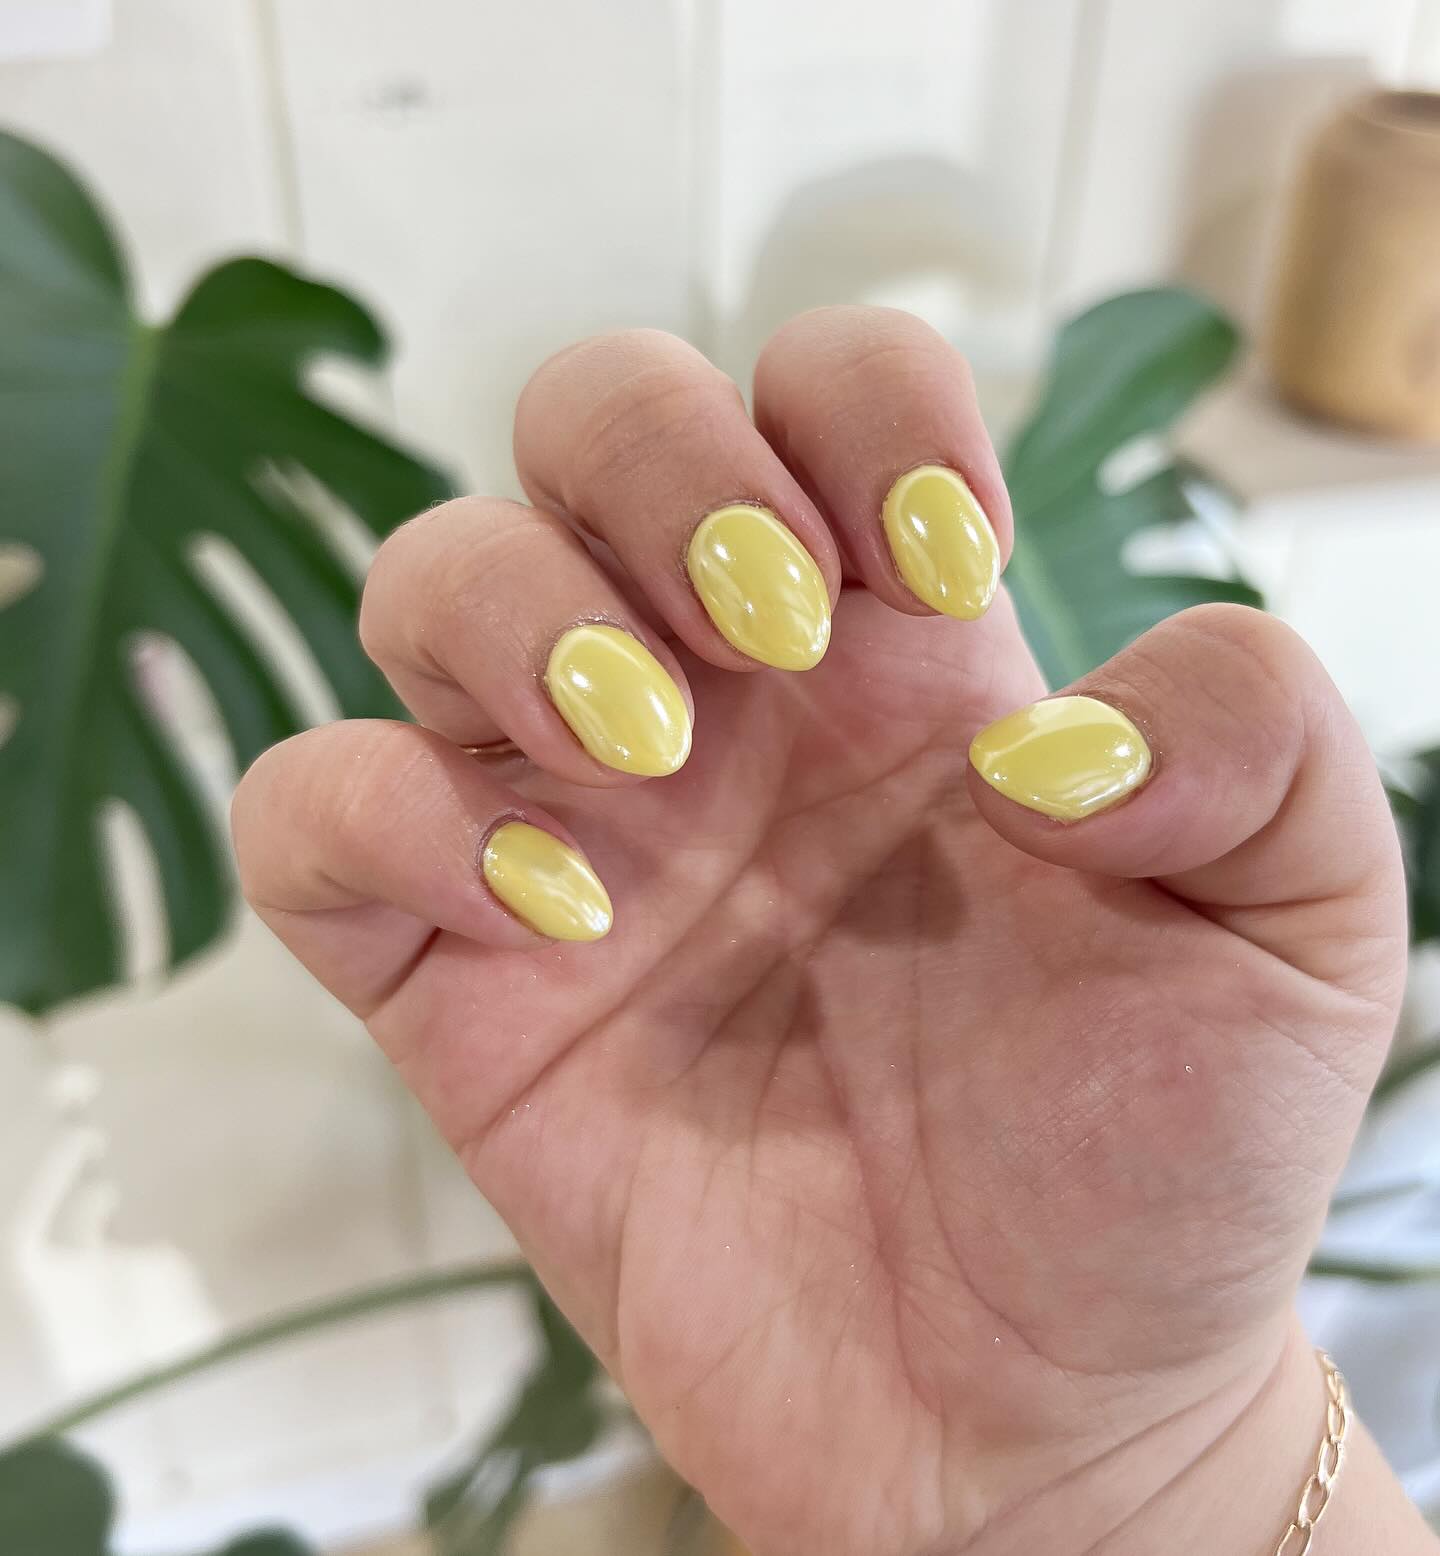 100+ Short Nail Designs You’ll Want To Try This Year images 96